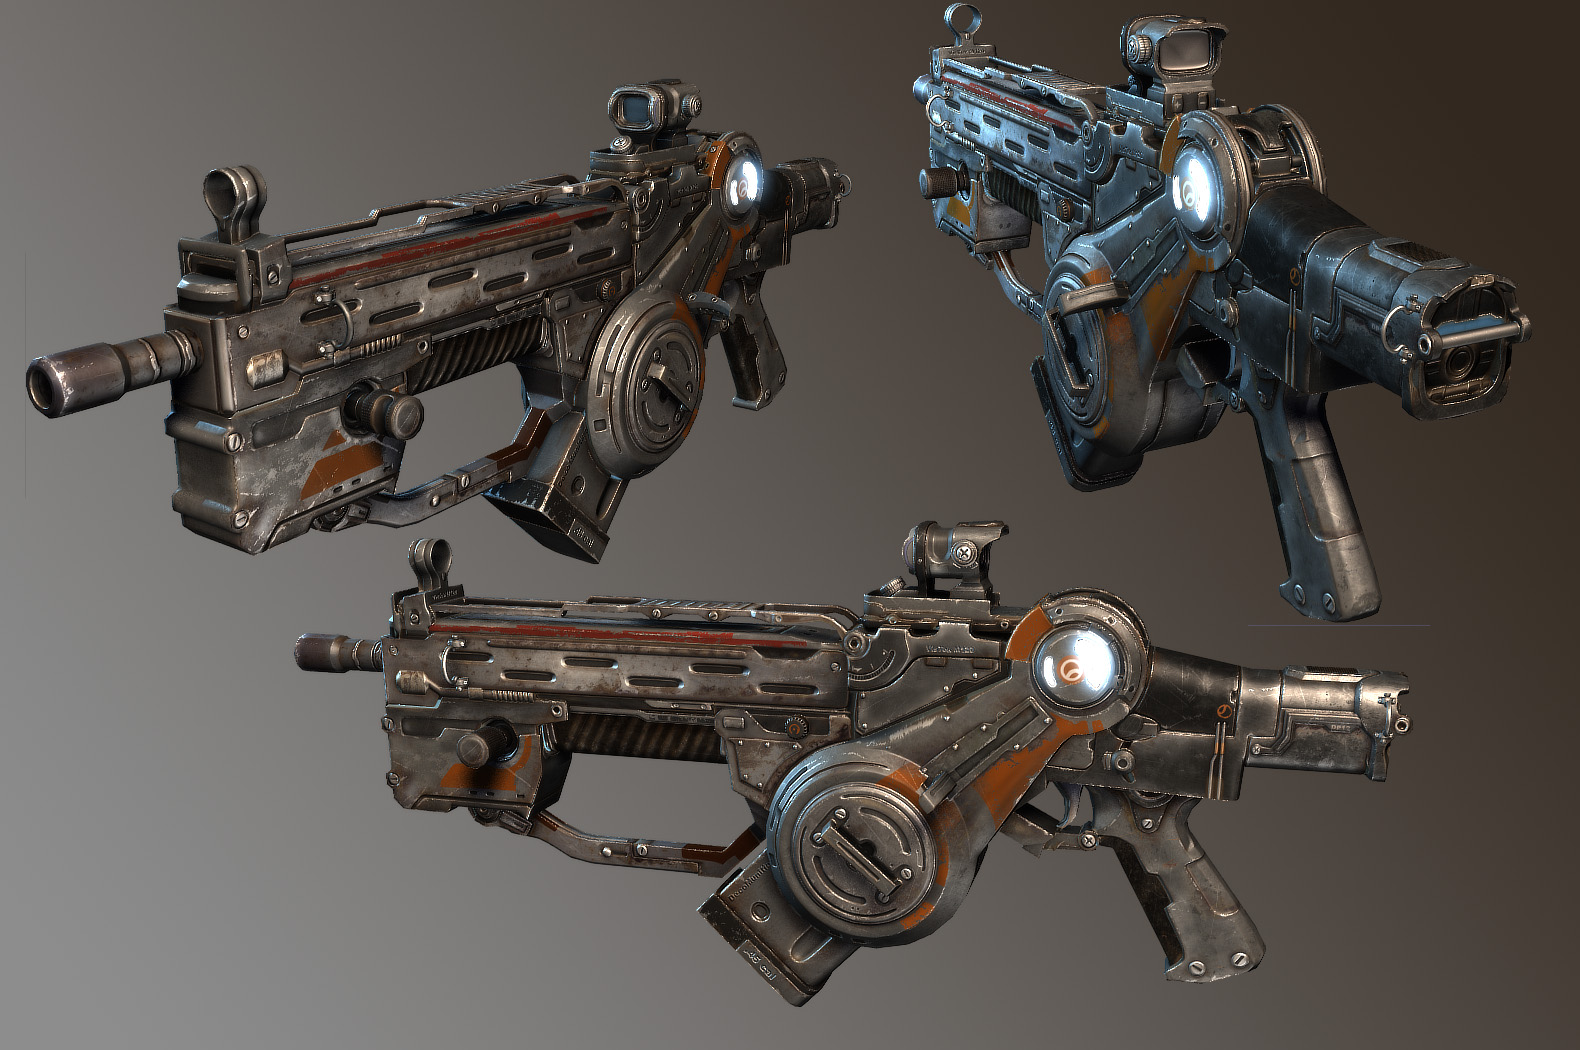 moof: well, the gun is inspired by the COG-weapons from gears of war, and g...